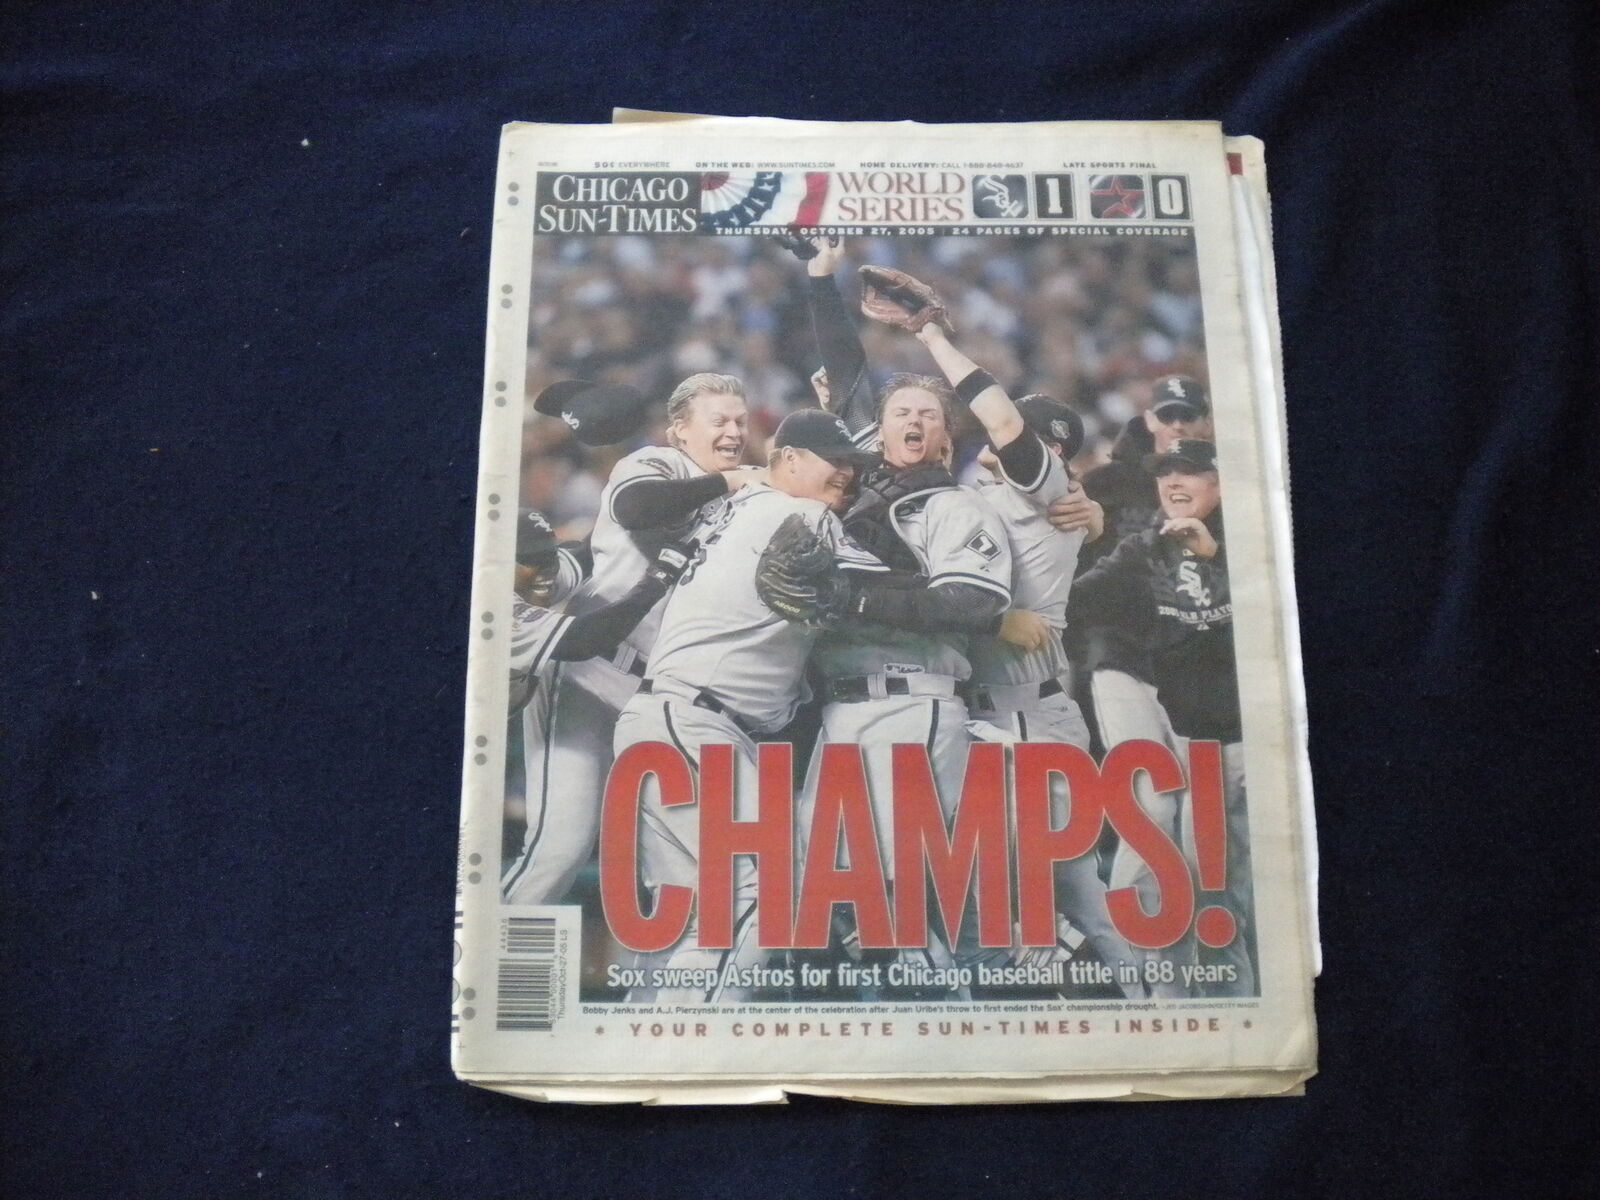 2005 OCTOBER 27 CHICAGO SUN-TIMES NEWSPAPER - CHICAGO WHITE SOX CHAMPS - NP 5954